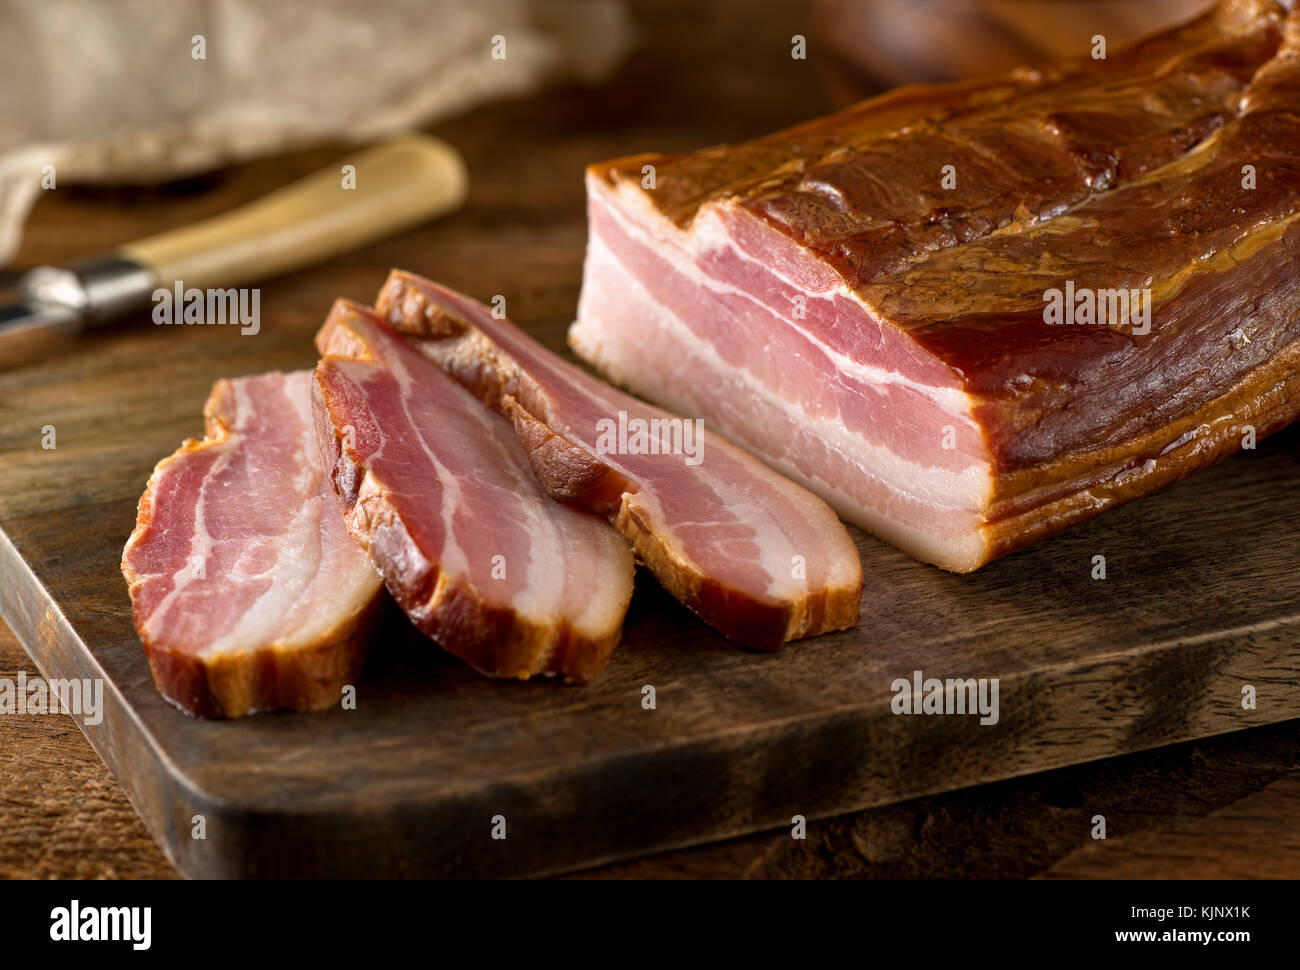 Delicious artisanal whole smoked slab bacon on a cutting block. Stock Photo